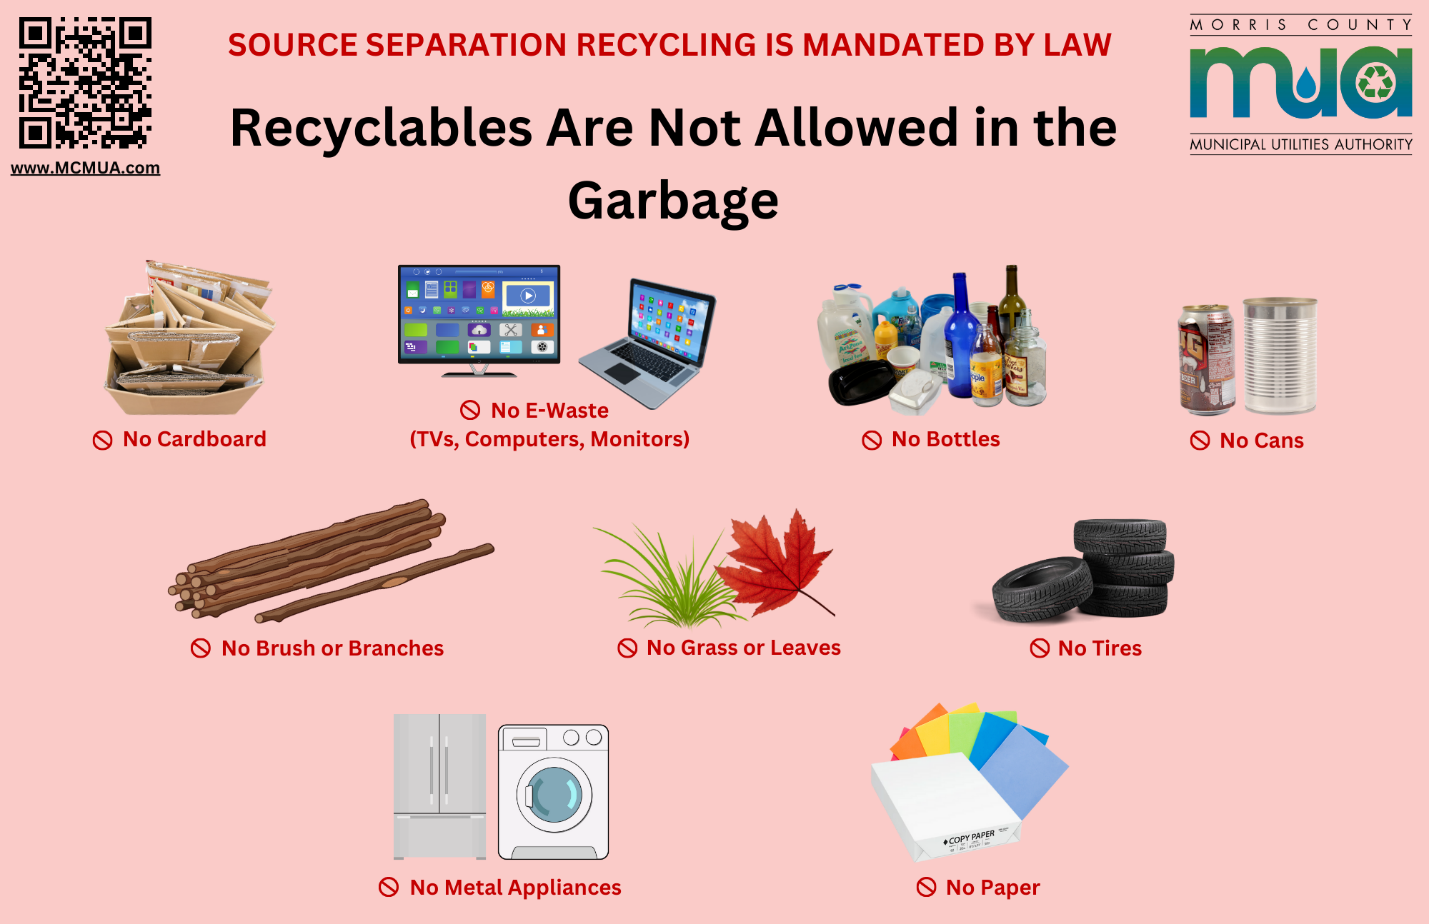 image of mandated recyclables not allowed in dumpster